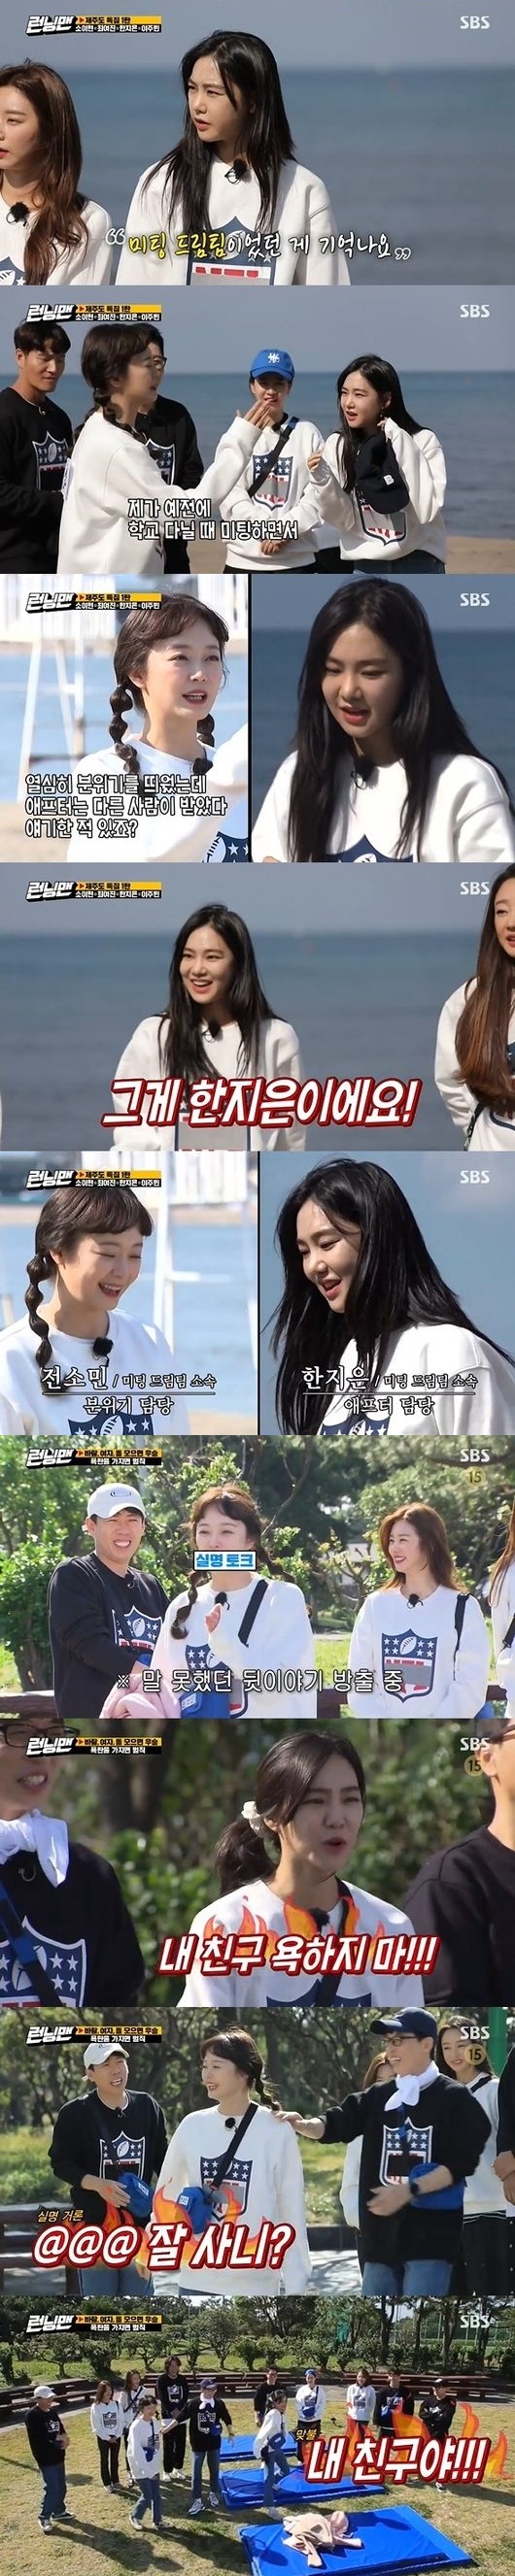 Running Man Jeon So-min and Han Ji-eun exposed the behind-the-scenes meeting of college and burst into big fun.On SBS Running Man broadcasted on the afternoon of the afternoon, Jeon So-mins college motive Han Ji-eun appeared and the past Meeting The Dream Team episode was released.On this day, Running Man was decorated with Jeju Island Special Feature 1, and actress Soi Hyun, Choi Ji Jin, Han Ji-eun and Lee Ju-bin were invited as guests.Jeon So-min and Han Ji-eun are from Dongduk Womens Universitys Department of Broadcasting Entertainment, and Han Ji-eun took on the role of drama producer marketing PD Hwang Han-joo in JTBC drama Meloga Constitution broadcast last year.Asked What Friend was it in college? Han Ji-eun said I dont know and Jeon So-min said, Its not clear, somethings not cleaner than that.There was a man woven between Friends, he said.Han Ji-eun said, I dont know how far to talk about it because its the first time Ive had an entertainment, and I remember that it was The Dream Team in the meeting, while Jeon So-min said, Oh!I remember: I had a hard time meeting when I was in school, and after I got an after-sales. Thats Han Ji-eun.I put on the atmosphere and said, Ive passed it all over, but after I got it, he laughed at Han Ji-eun.I want to talk to the people, Kim Jong Kook and Haha started to drive, and Han Ji-eun said, Every time I met, my seniors designated me, and I always went out a lot.Im sorry if I did it at the meeting (as I said) but I didnt mean to.I did not do this because I liked them, but I did not do it. In fact, what I am remembering is that the direct relationship with me and Somin seems to be a sense of damage to me. Han Ji-eun said, I am a Memory minor, and I have a little bit of a relationship with a very close friend. That friend is a woman, and I am in the middle.But am I too bad? Oh, this is not going to turn around Mask. The mission middle Lee Ju-bin and Han Ji-eun met, and an awkward atmosphere flowed between college motives Jeon So-min and Han Ji-eun.Ji Suk-jin said, Are you thinking about that now?, Yang Se-chan said, Is something bad with the people?, and others also said, Why do not you two look at it once?, I came to Jeju Island to solve the problem, but I think there is a lot of money left. Han Ji-eun said, I did what I told you because it was the first time I was performing. I was trying to save you. Jeon So-min said, I can not.With all the members gathered for the last mission, Yoo Jae-Suk said, The Ji-eun was still, but you seem to have a sense of damage. Planes passes around here every four minutes.(If you hear Planes noise), you can tell what you want to say then; Im tired when acquaintances come out of the original program. Jeon So-min said: The builder is clean.When Planes passed by, he shouted the blindness of his college motive, and Han Ji-eun said, Do not swear my Friend! Its my Friend!I keep waiting for Planes. How about the next place at the airport? Planes will be good again, Mask, the members of the Running Man added.Running Man screen captures